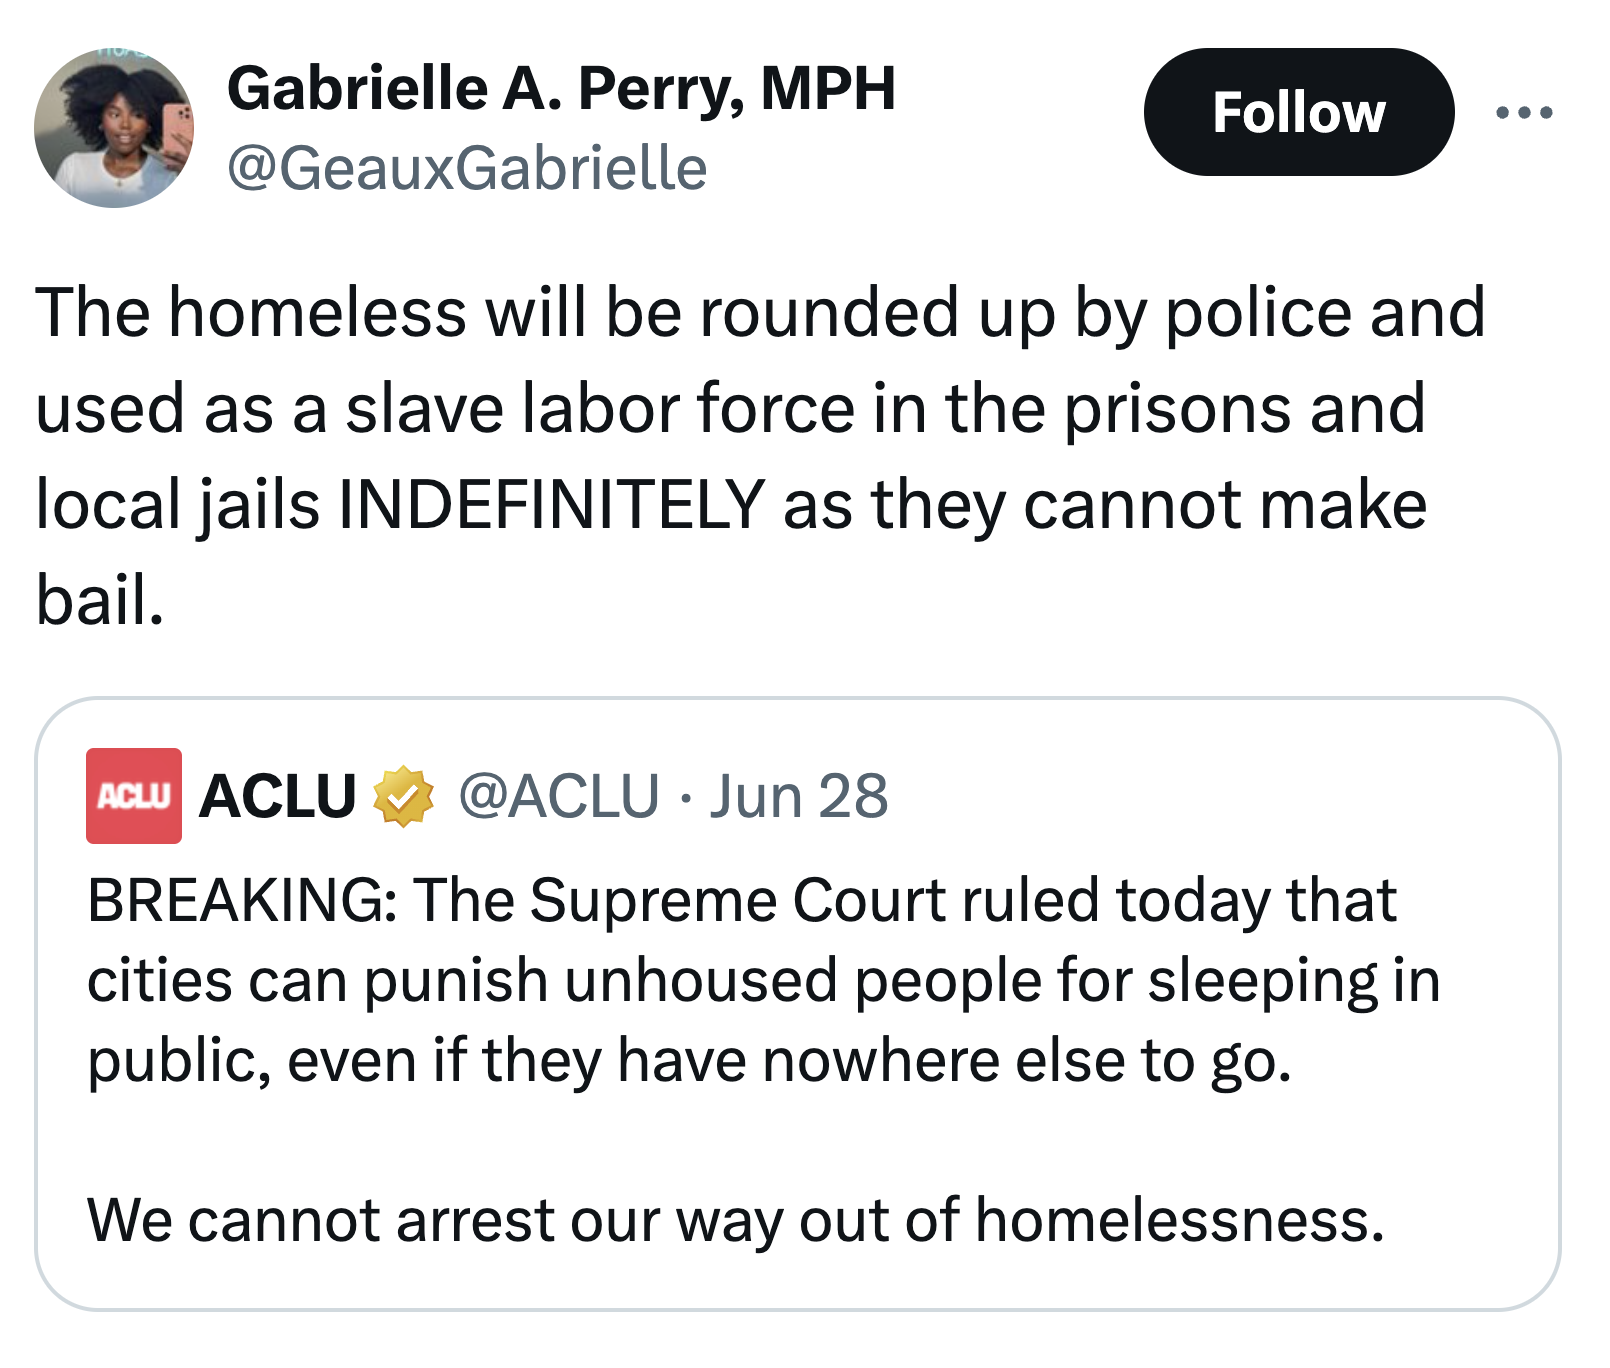 screenshot - Gabrielle A. Perry, Mph The homeless will be rounded up by police and used as a slave labor force in the prisons and local jails Indefinitely as they cannot make bail. Aclu Aclu Jun 28 Breaking The Supreme Court ruled today that cities can pu